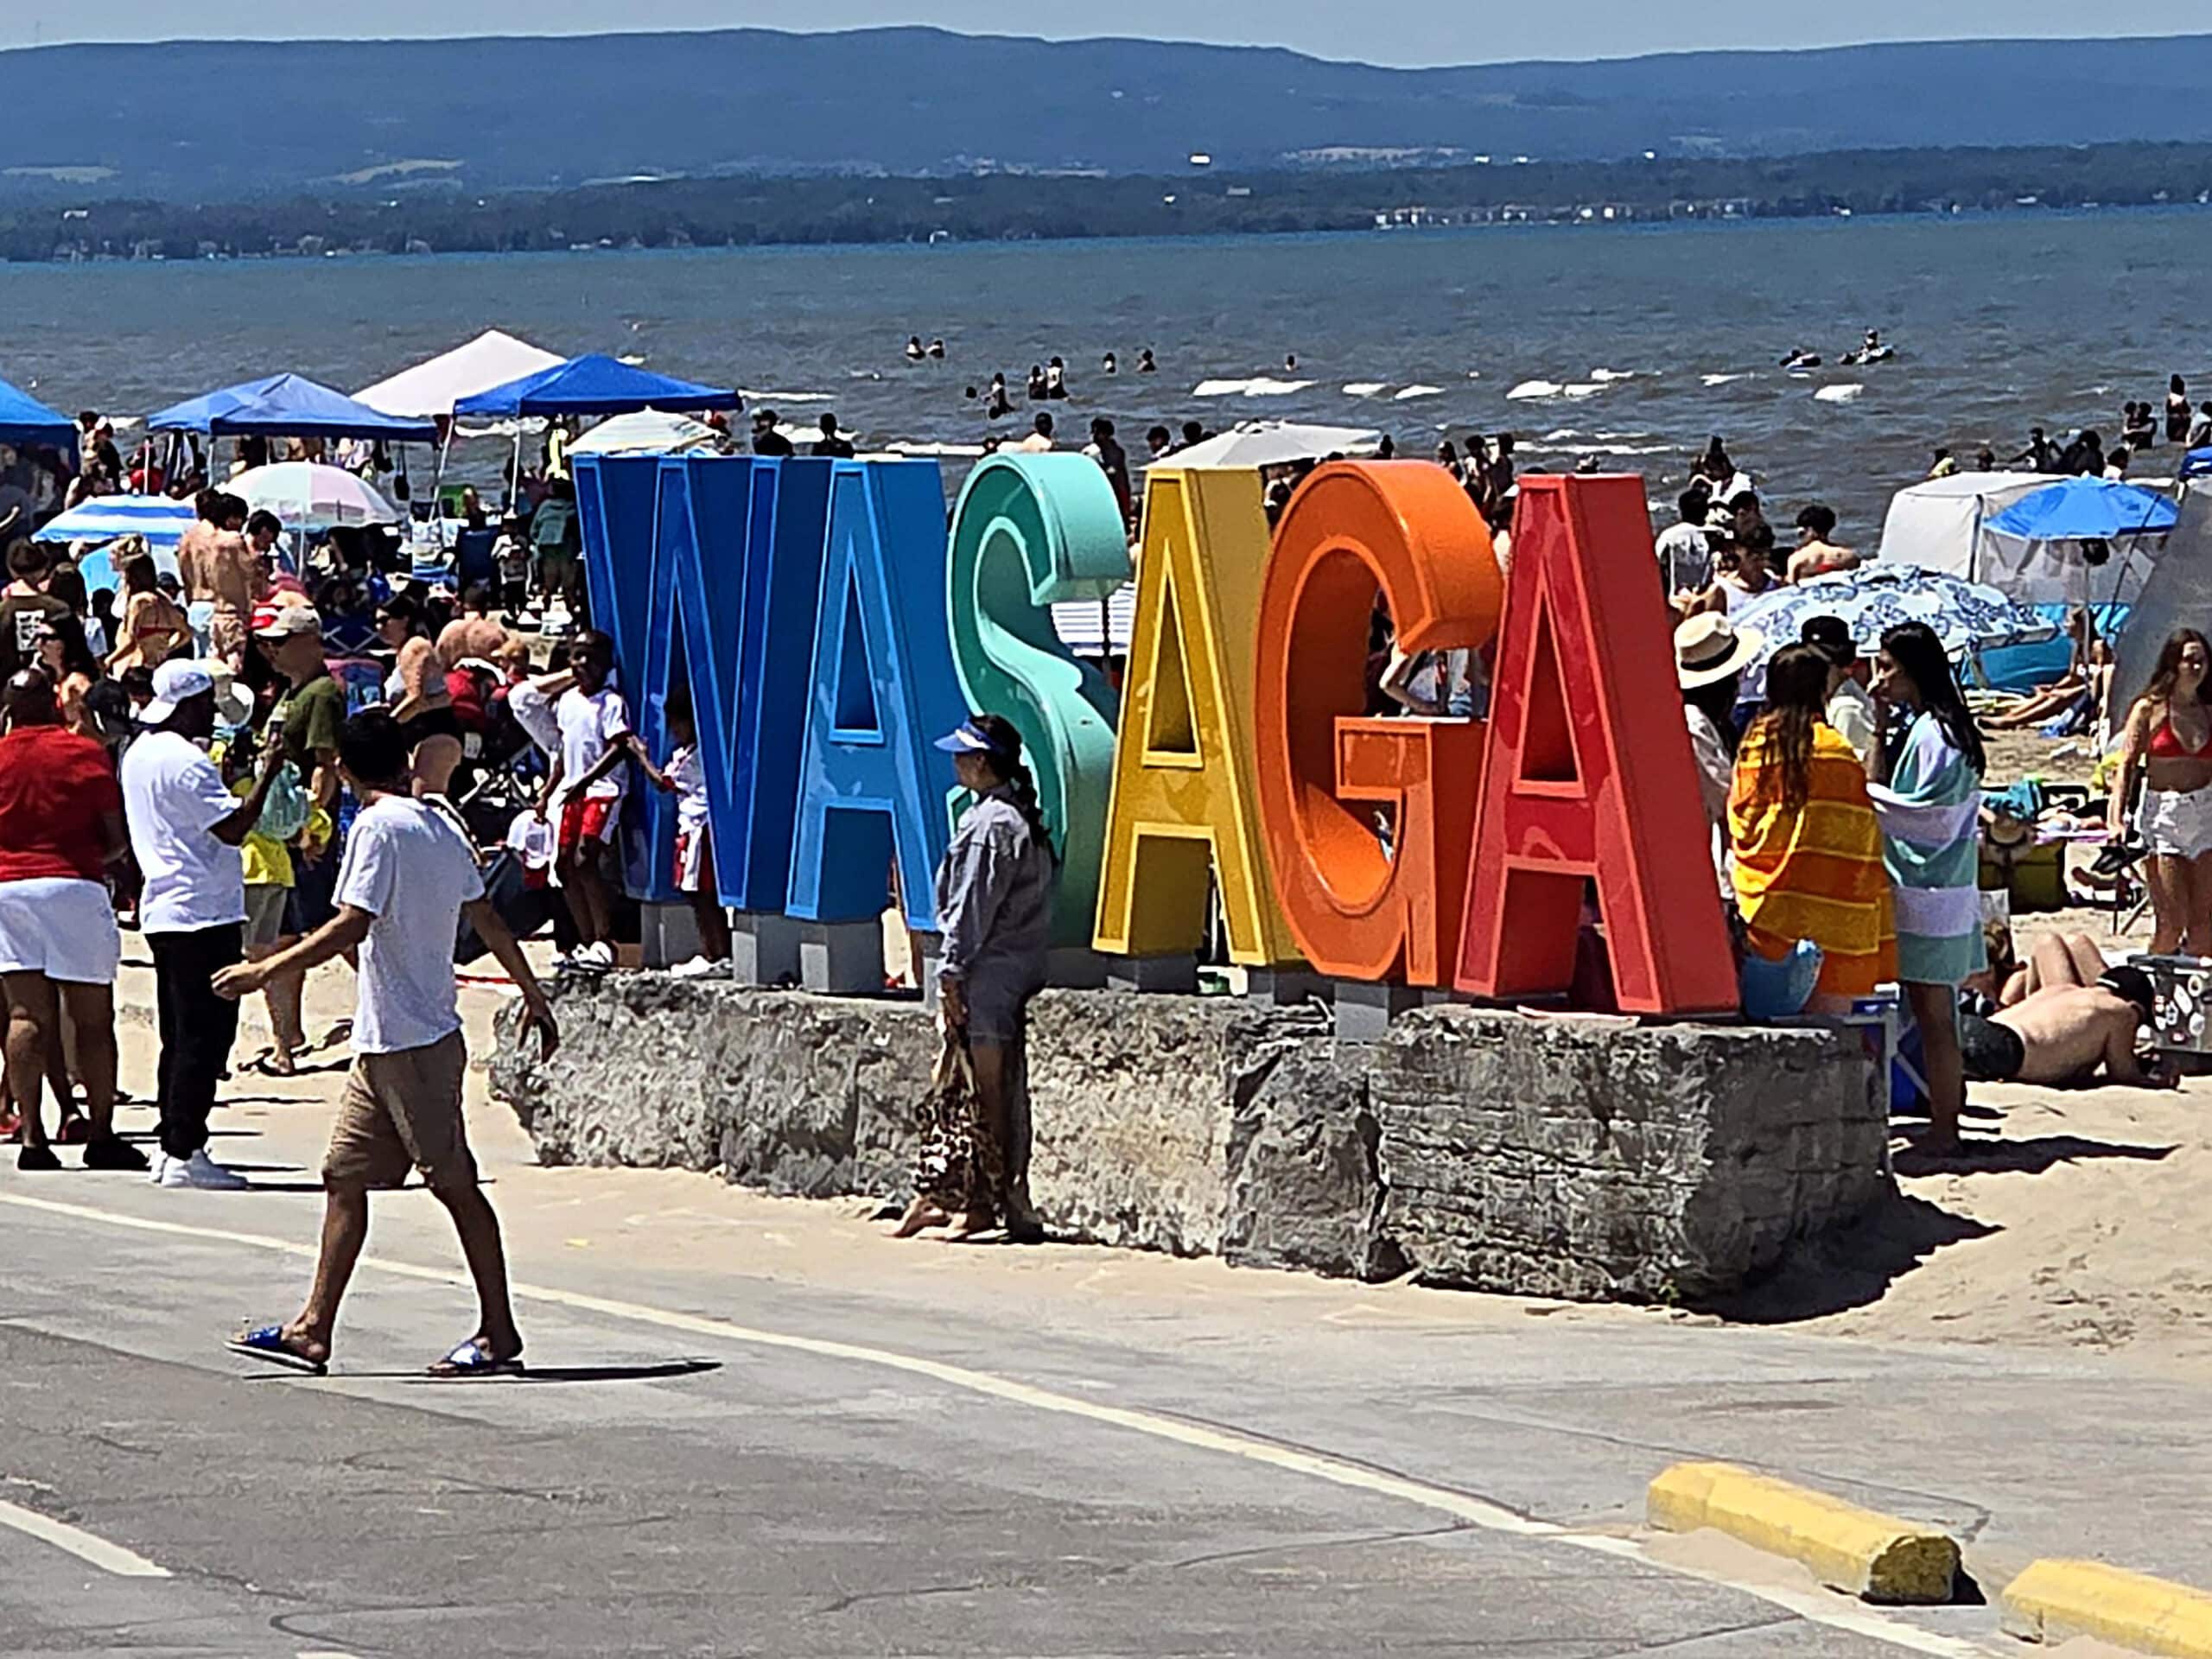 A rainbow sign that says wasaga, surrounded by people.